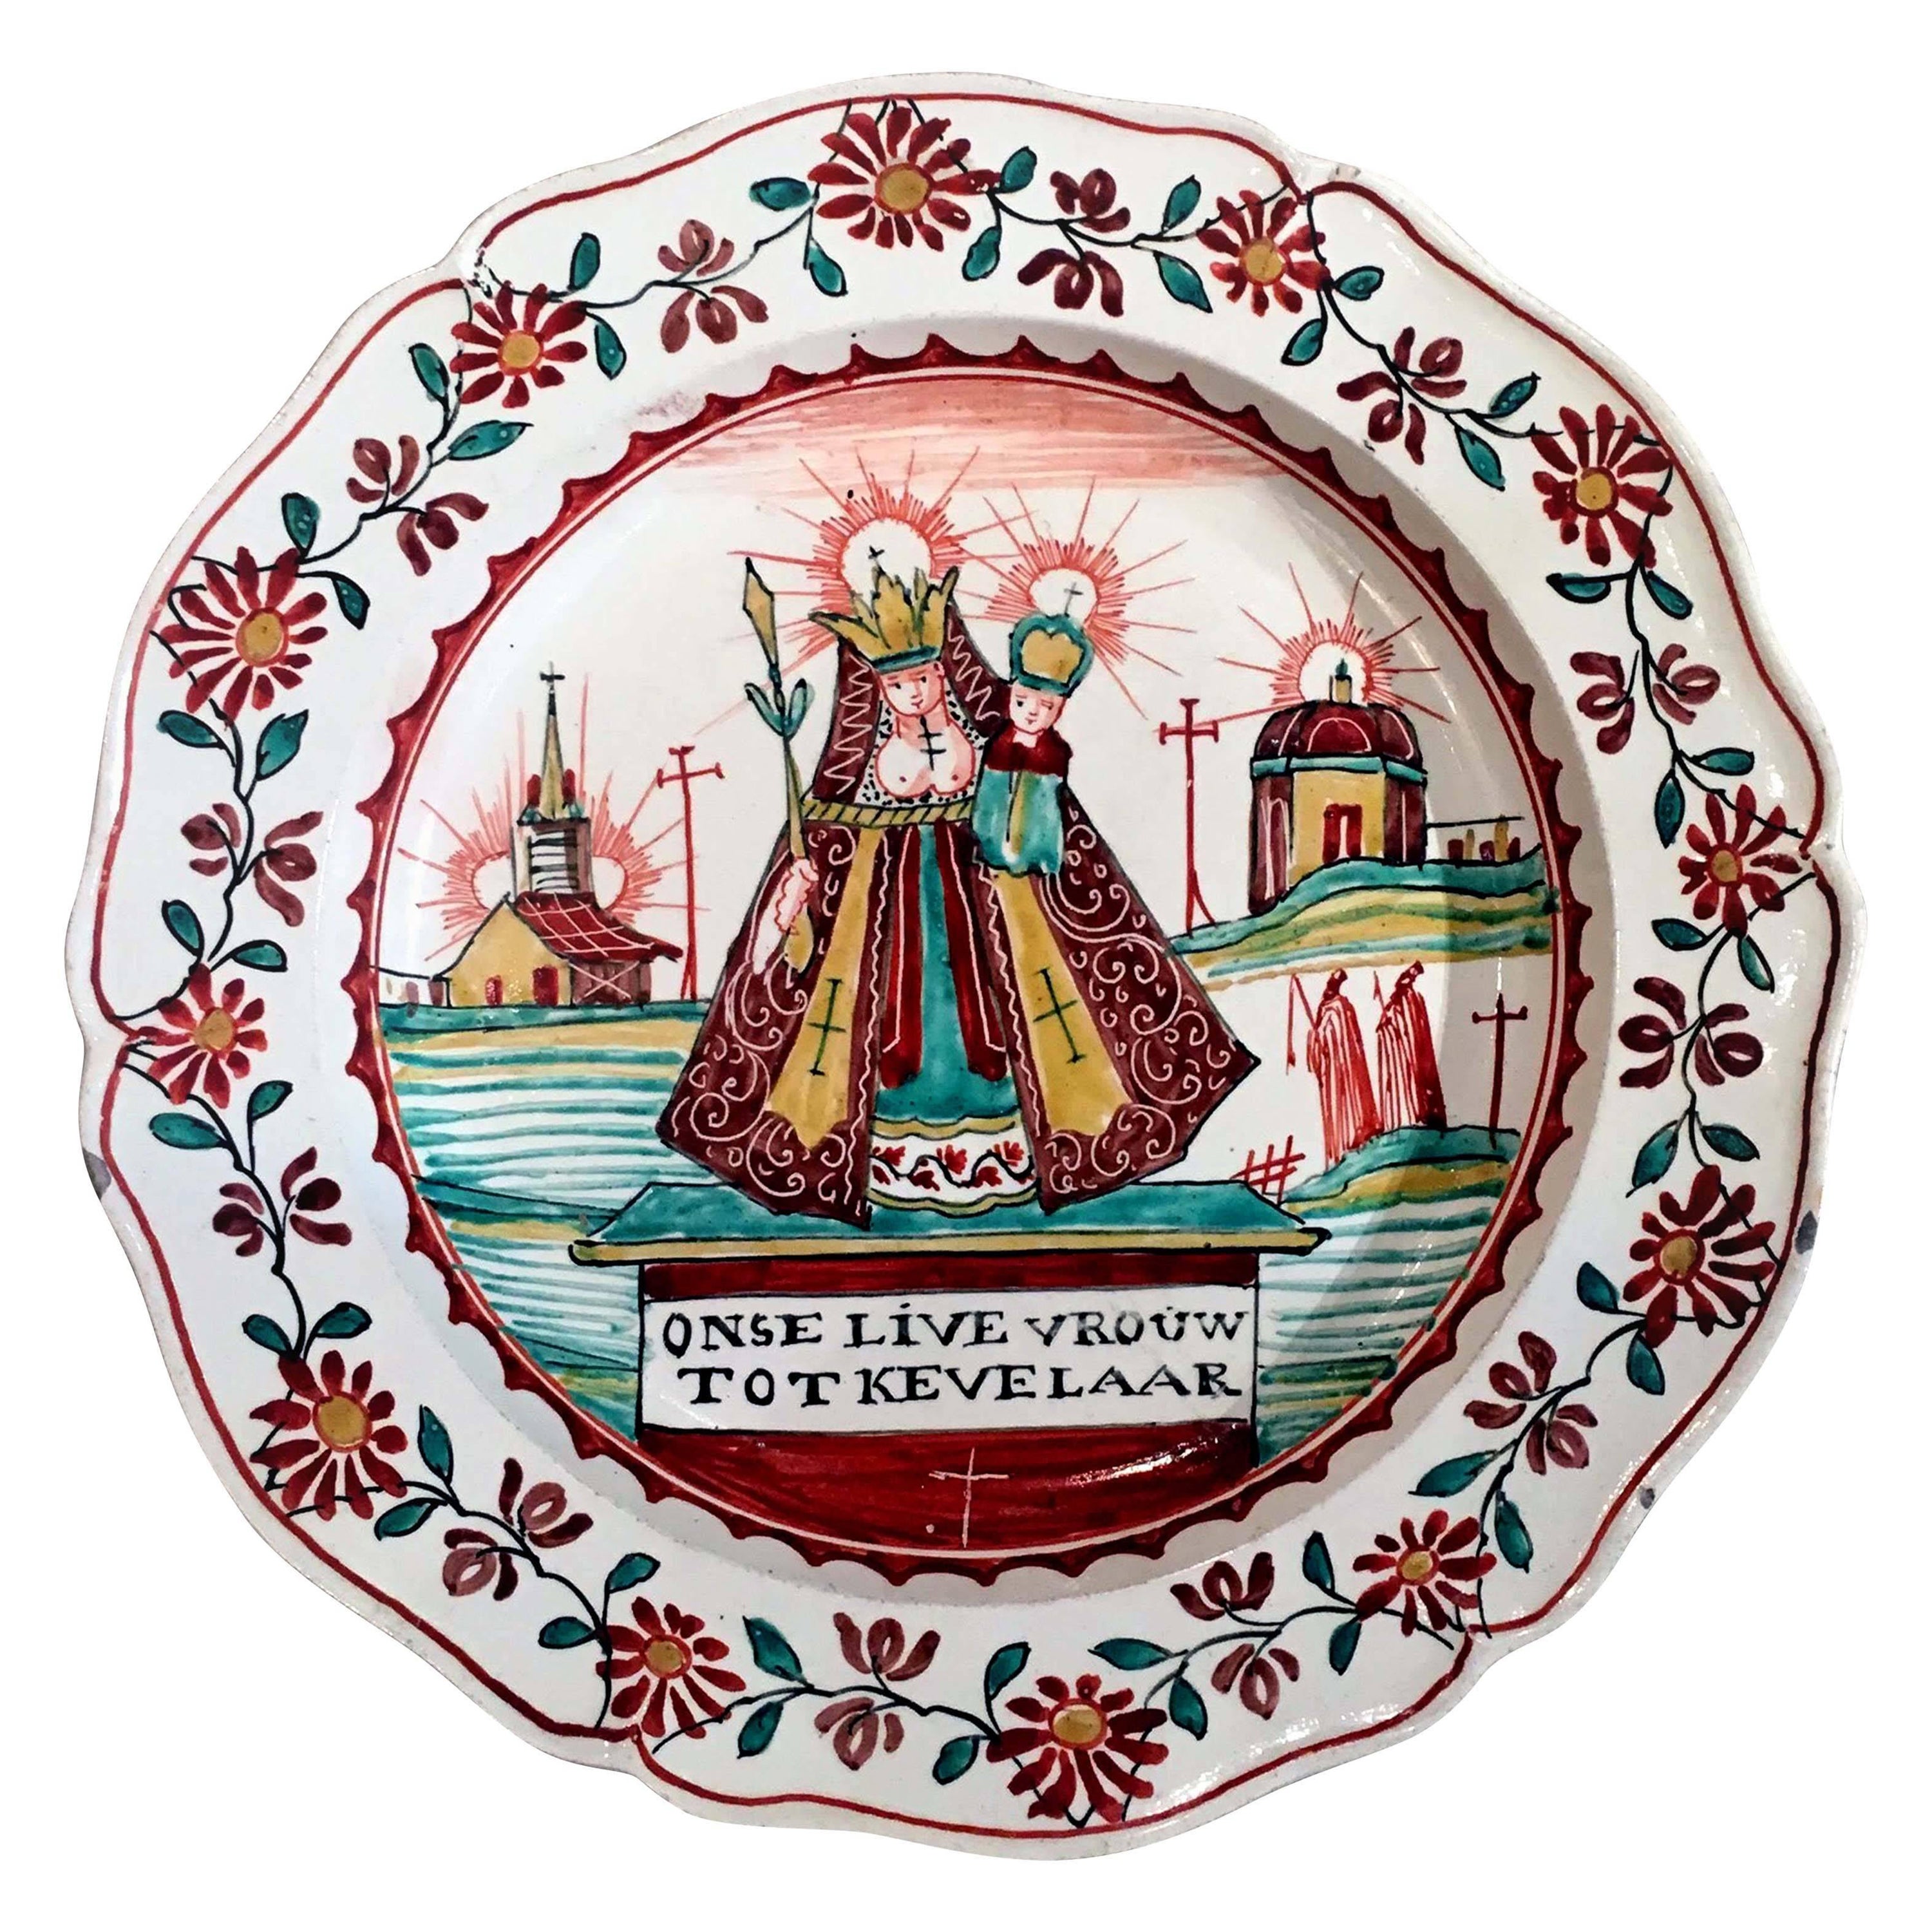 18th C. Dutch Decorated English Creamware Plate, Onse Live Vrouw Tot Kevelaar